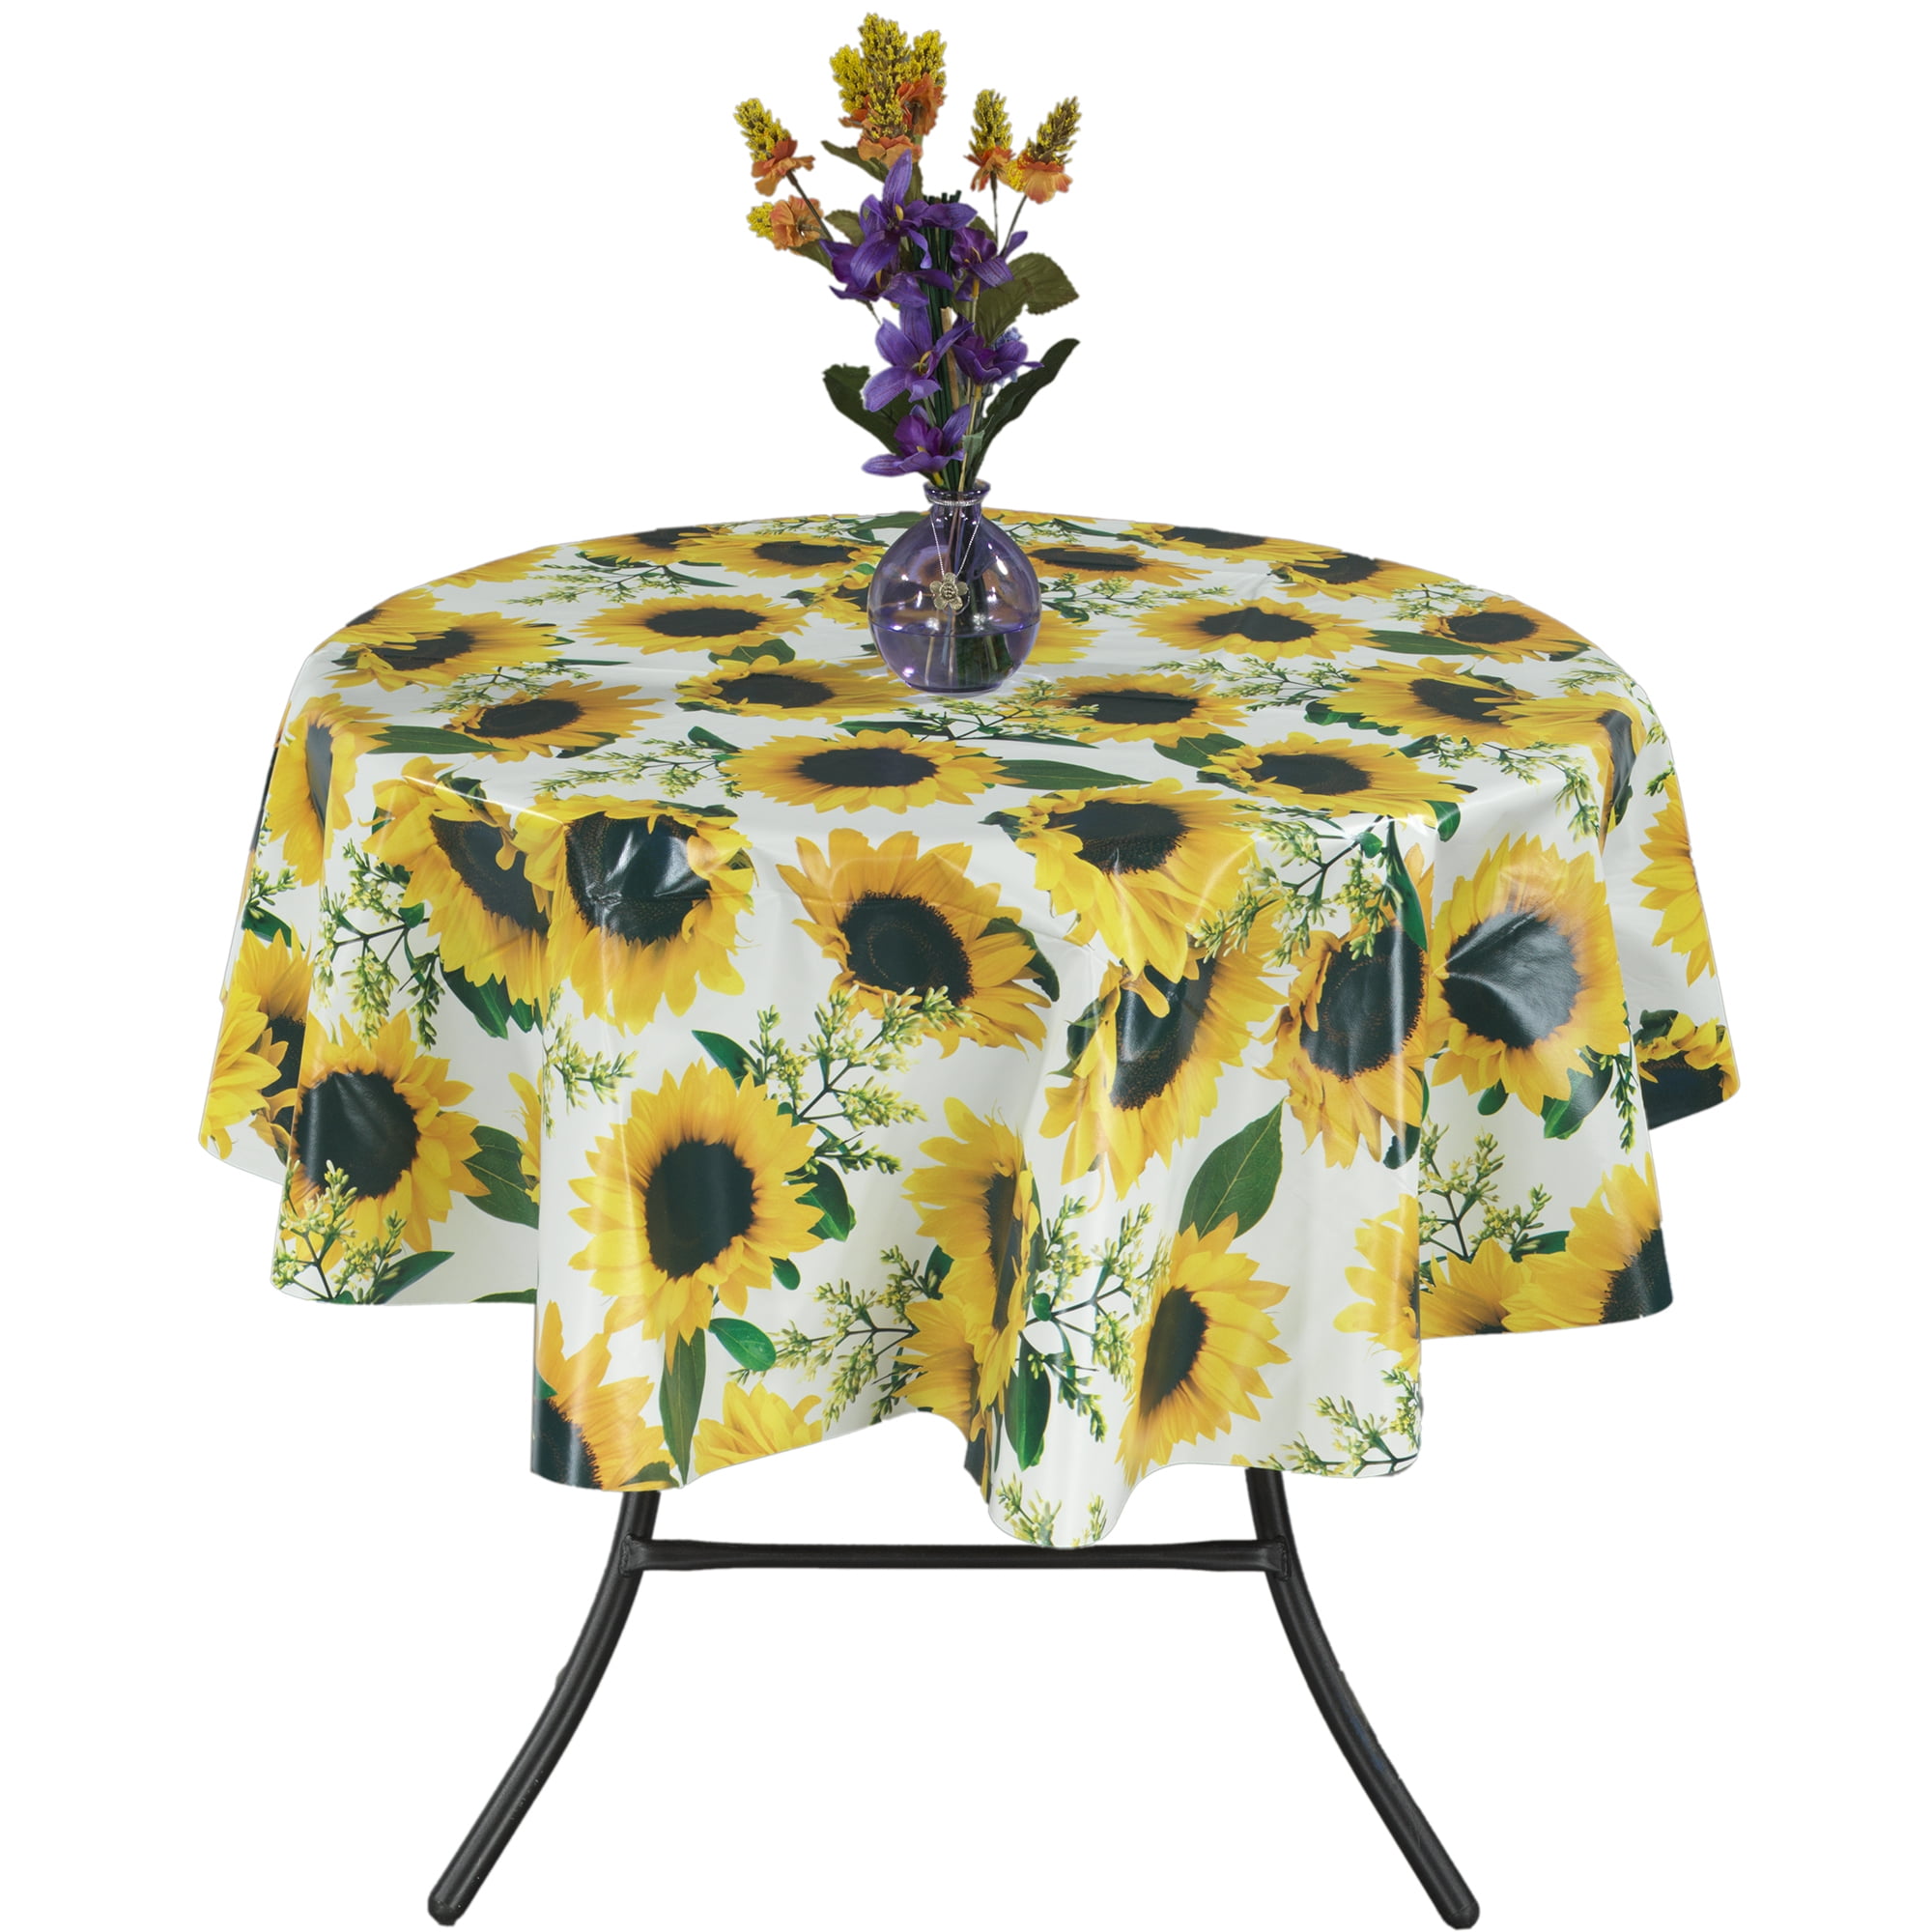 SUNFLOWER & BUTTERFLIES POLYESTER TABLE TOPPER 51.5" SQUARE TABLECLOTHS